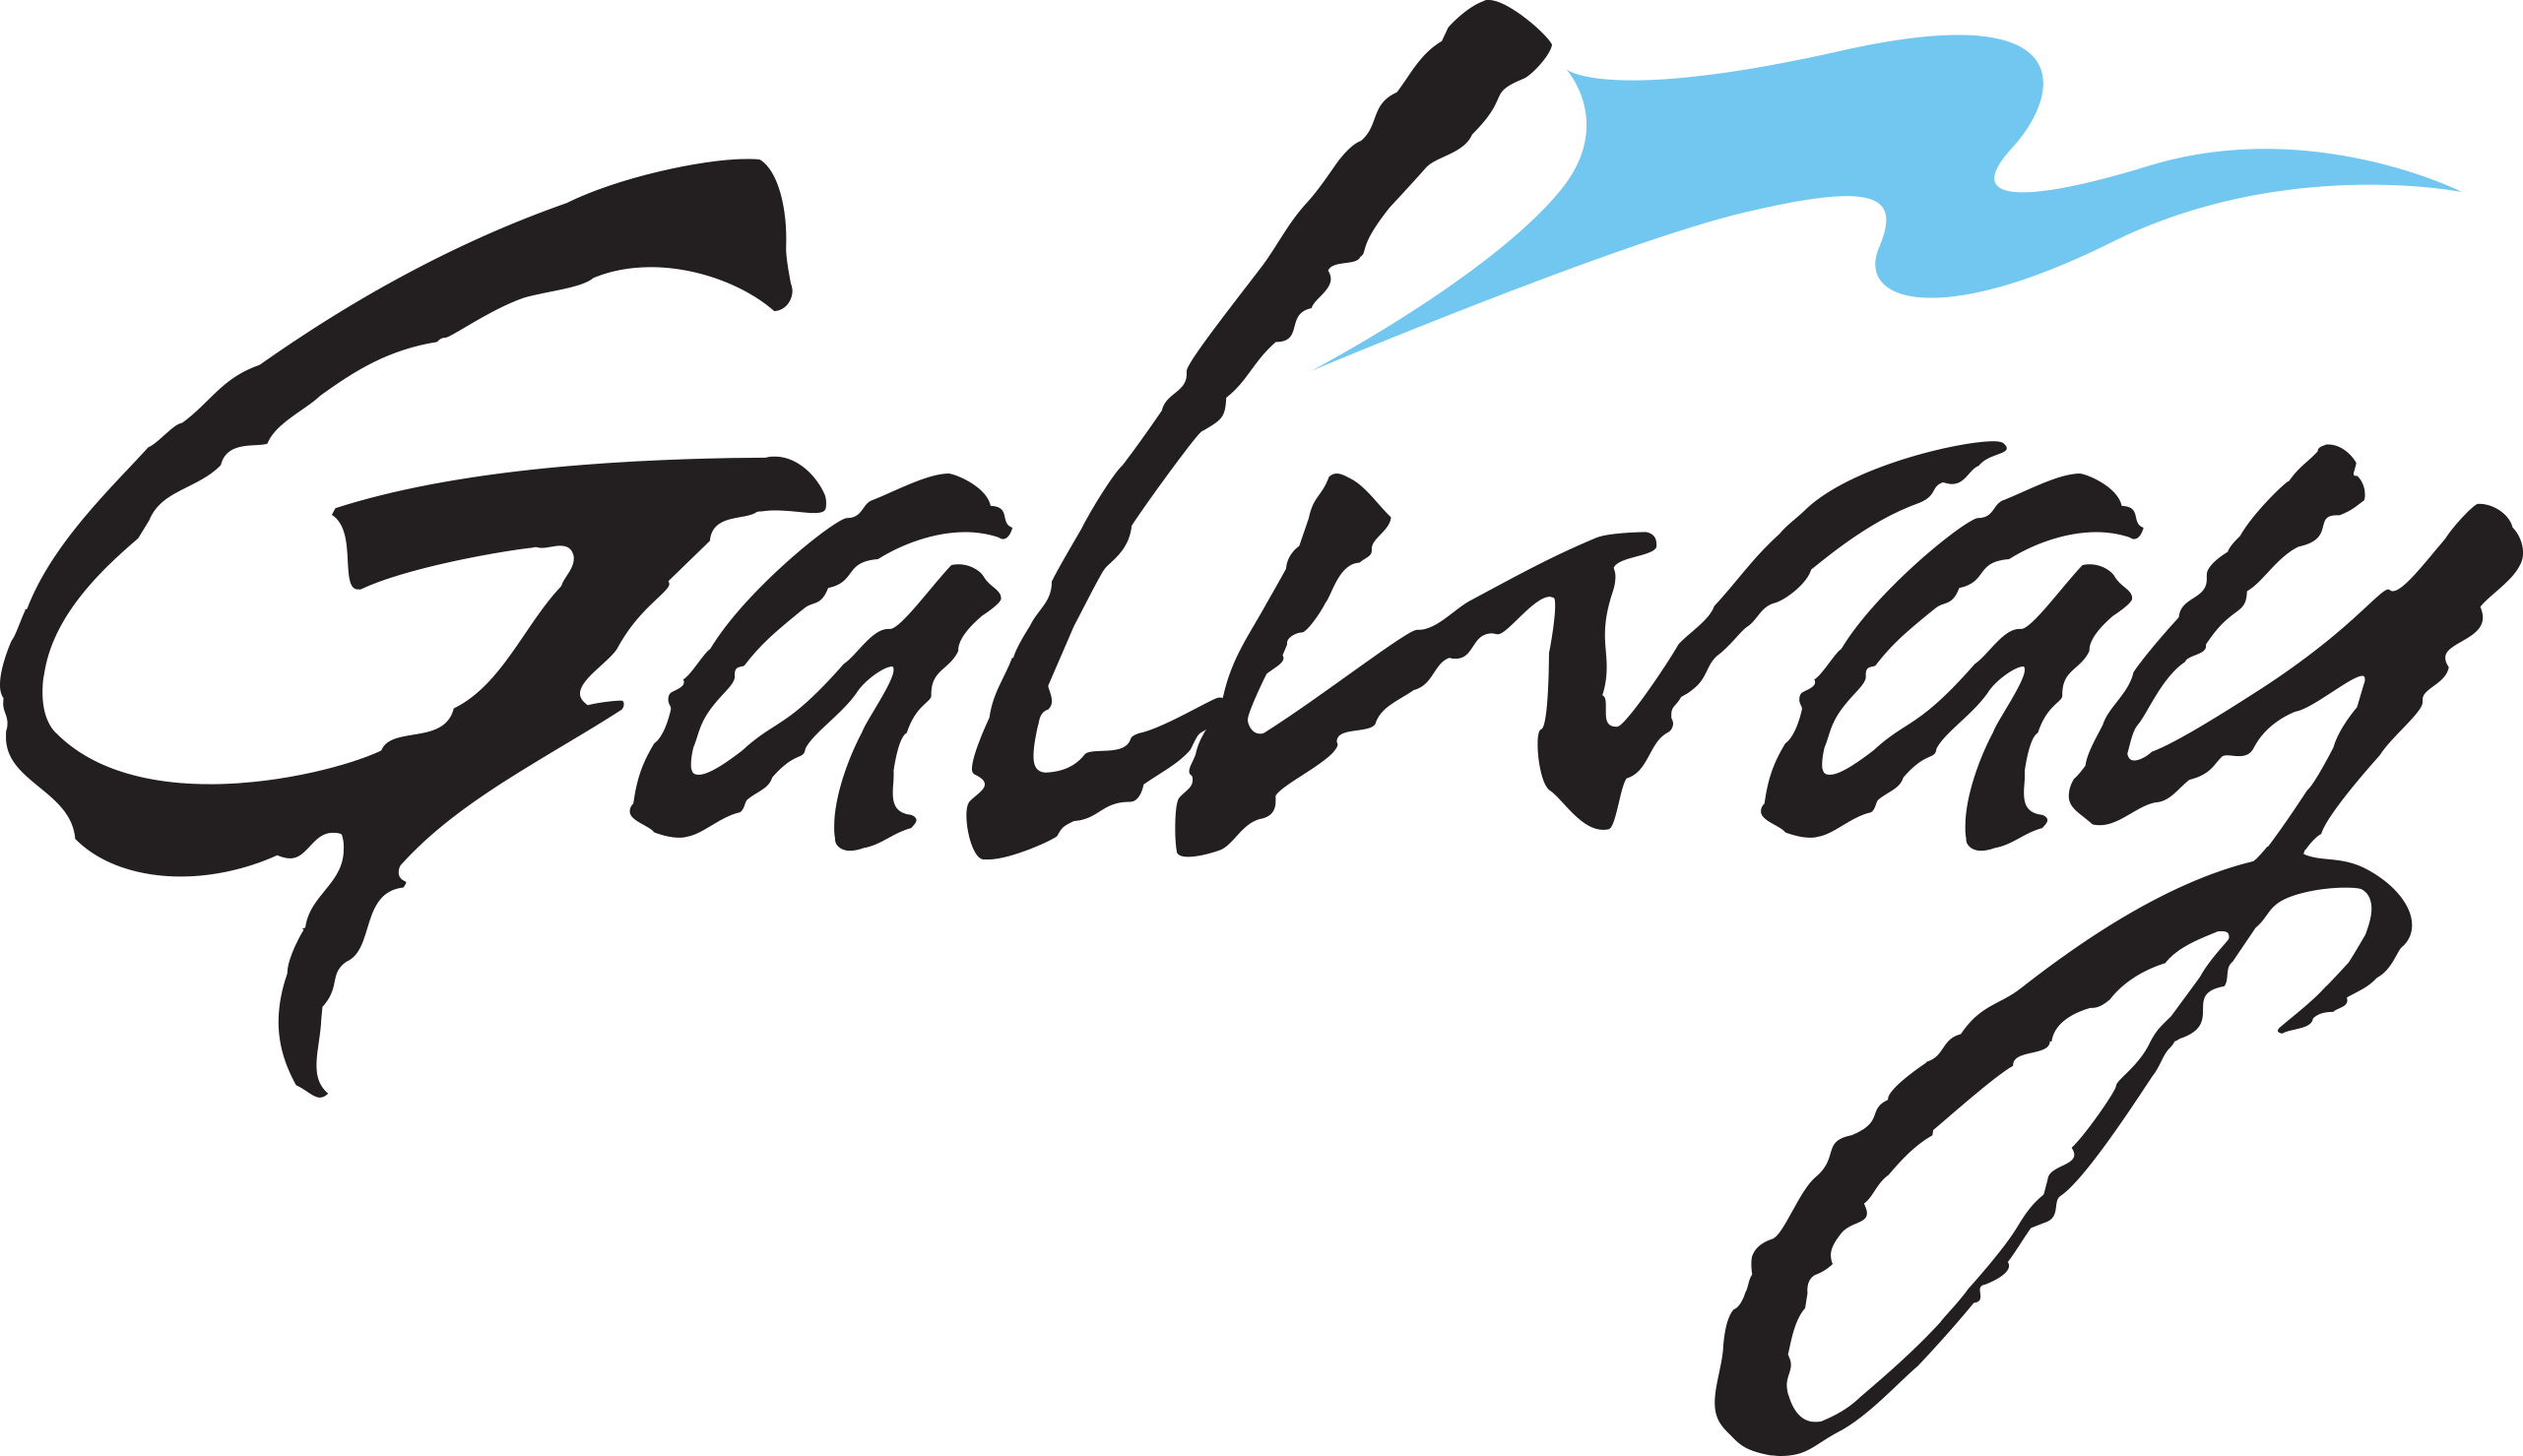 Galway Logo - All roads lead to Galway. John's Board of Trade